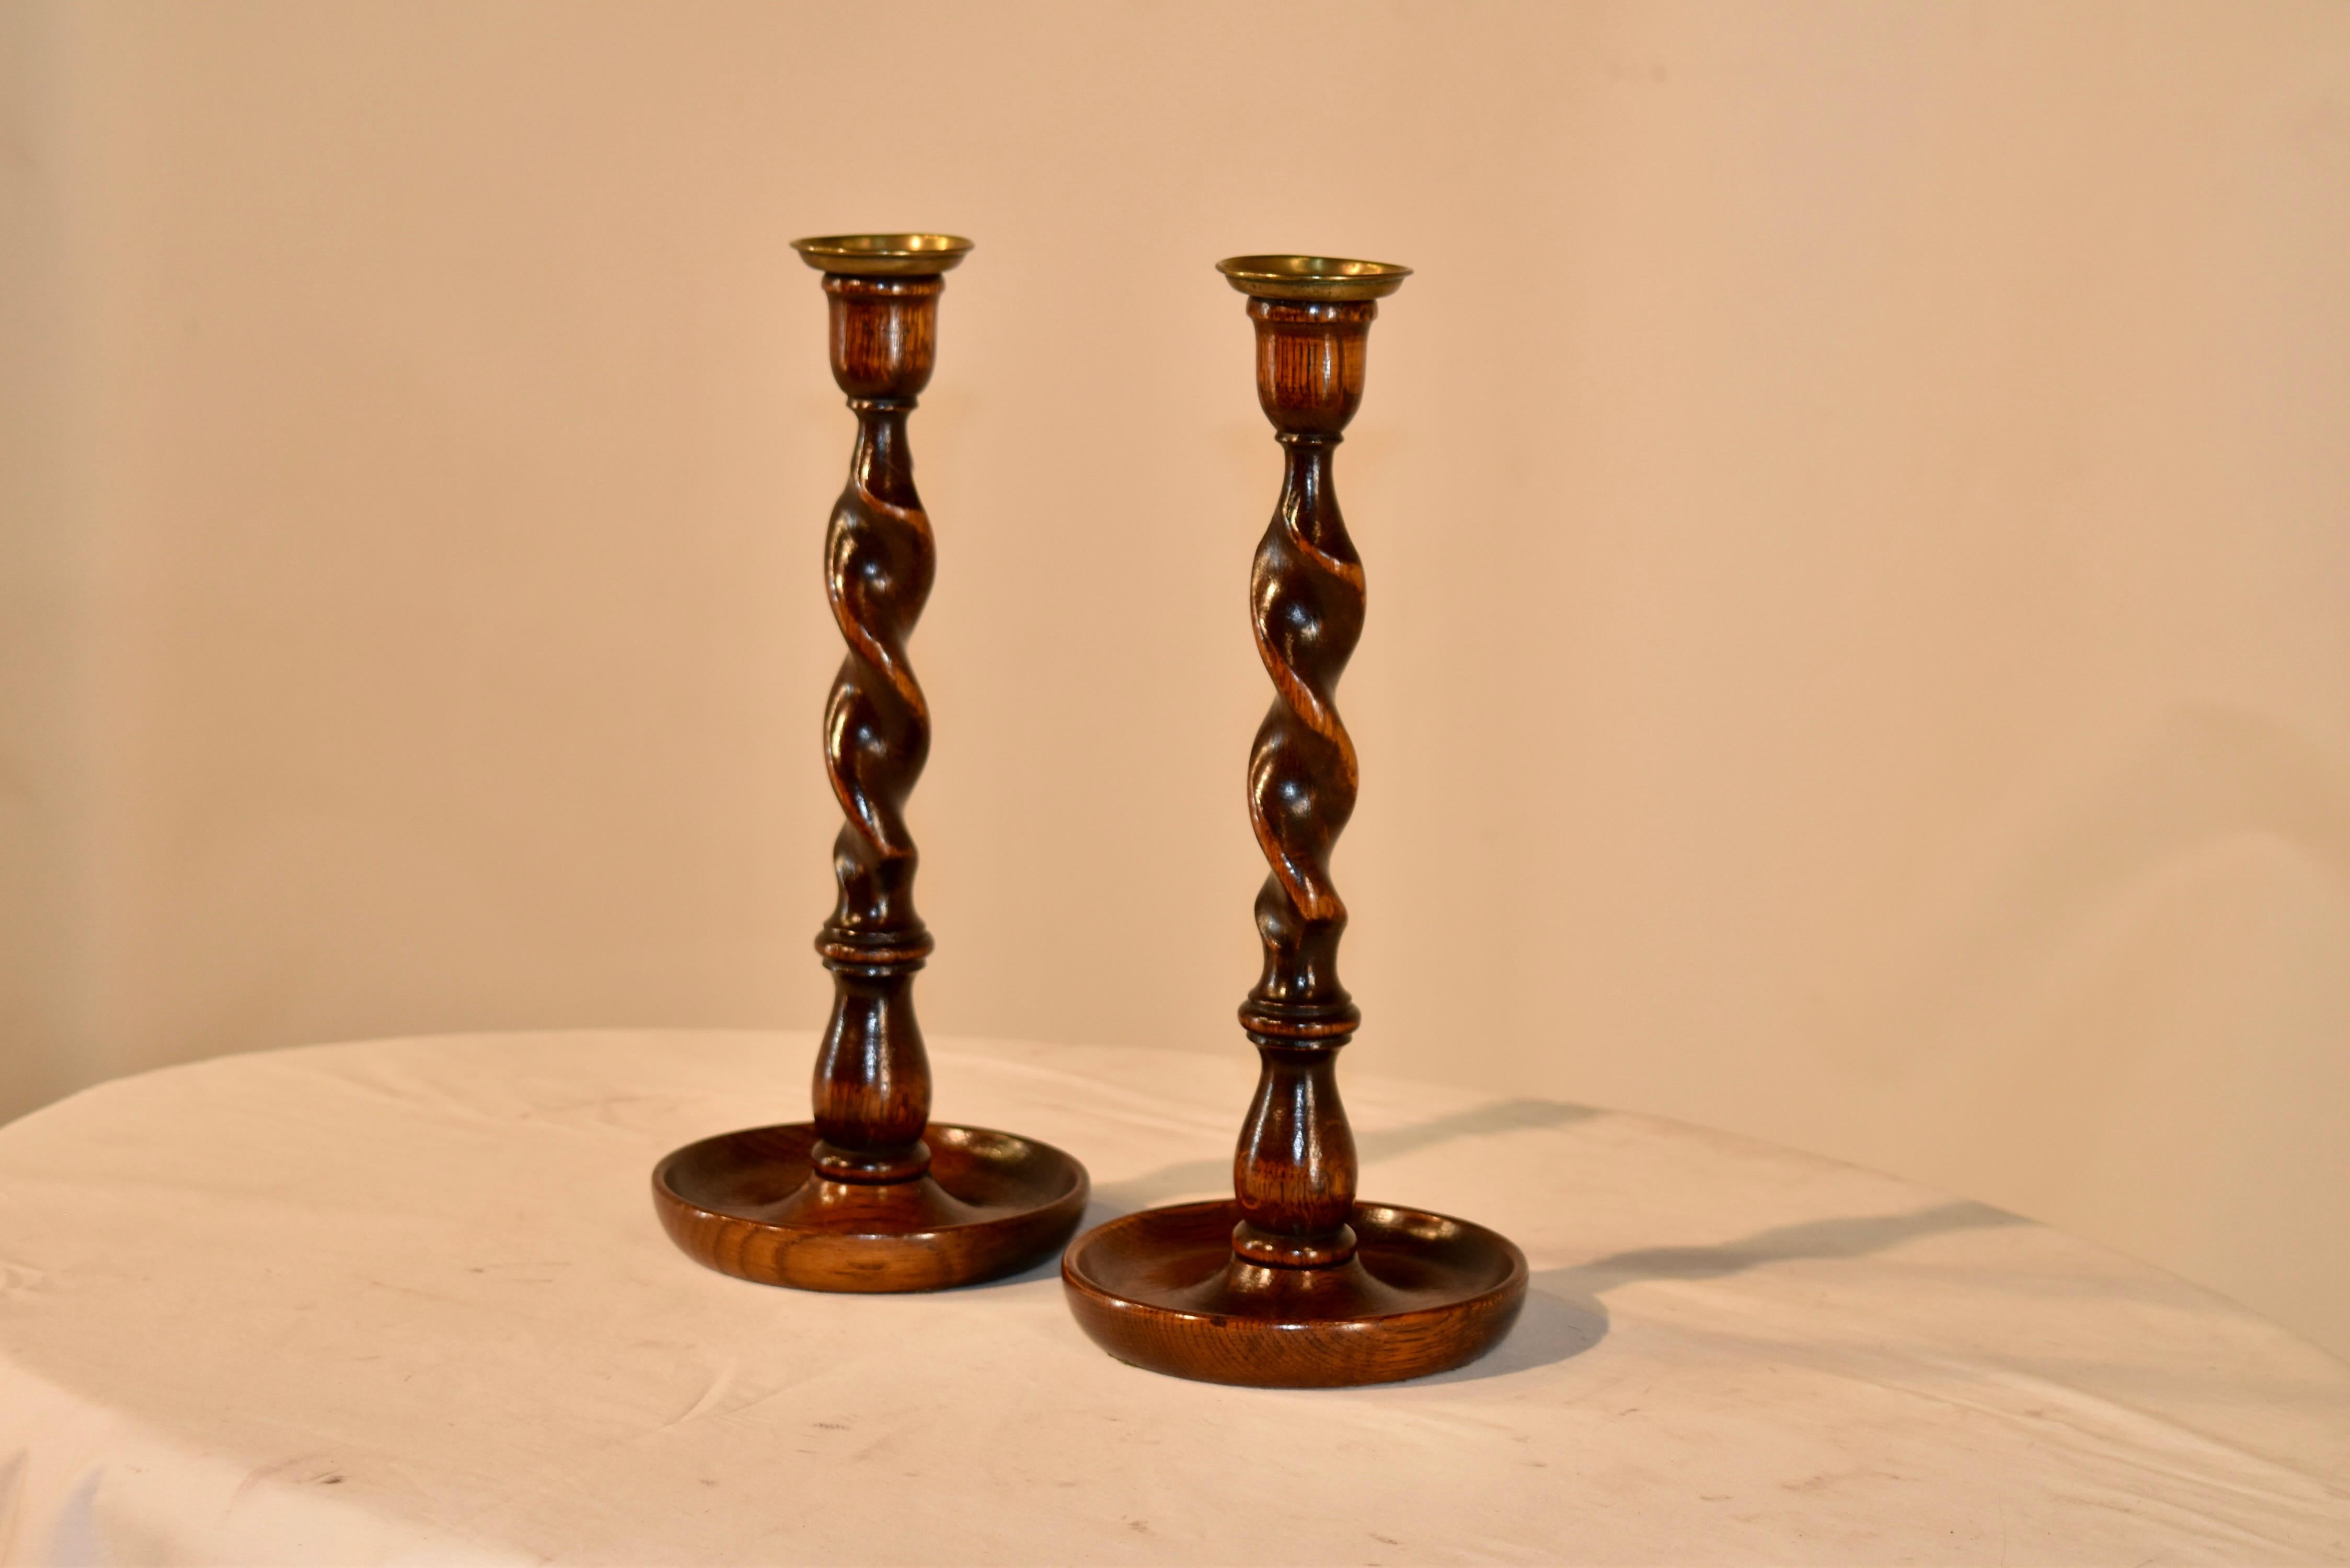 Pair of 19th century oak candlesticks from England with hand turned brass candle cups, supported on hand turned candle cups and barley twist stems, sitting on a hand turned dish shaped base.